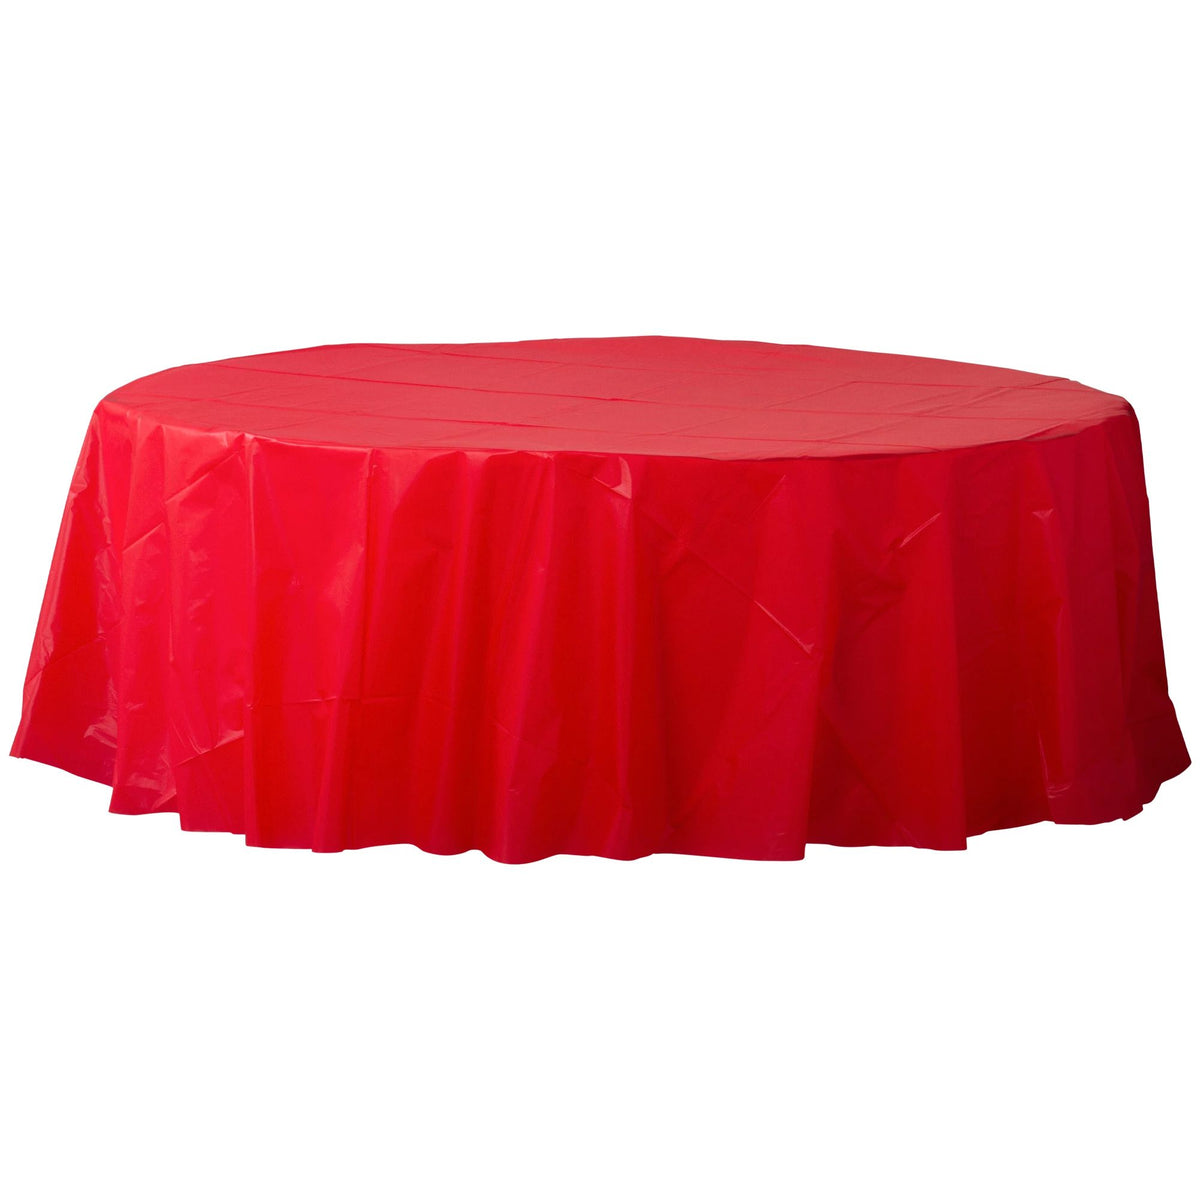 Red 84" Round Plastic Table Cover